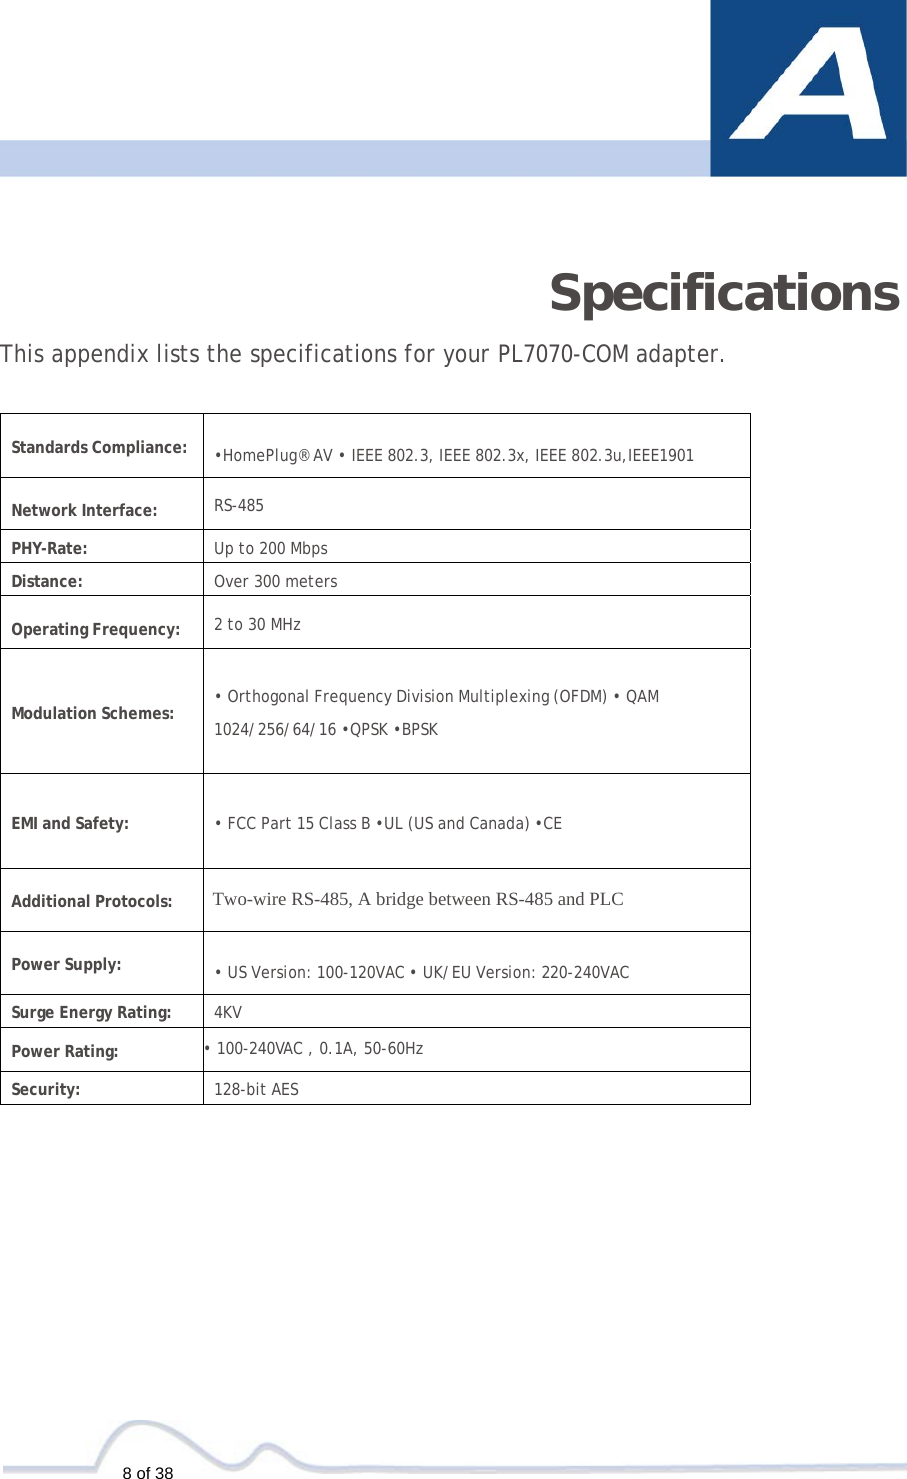    8 of 38        Specifications  This appendix lists the specifications for your PL7070-COM adapter.   Standards Compliance:  •HomePlug® AV • IEEE 802.3, IEEE 802.3x, IEEE 802.3u,IEEE1901  Network Interface: RS-485 PHY-Rate:  Up to 200 Mbps Distance: Over 300 meters  Operating Frequency: 2 to 30 MHz Modulation Schemes: • Orthogonal Frequency Division Multiplexing (OFDM) • QAM  1024/256/64/16 •QPSK •BPSK EMI and Safety: • FCC Part 15 Class B •UL (US and Canada) •CE Additional Protocols: Two-wire RS-485, A bridge between RS-485 and PLC Power Supply:  • US Version: 100-120VAC • UK/EU Version: 220-240VAC Surge Energy Rating: 4KV Power Rating: • 100-240VAC , 0.1A, 50-60Hz Security: 128-bit AES 